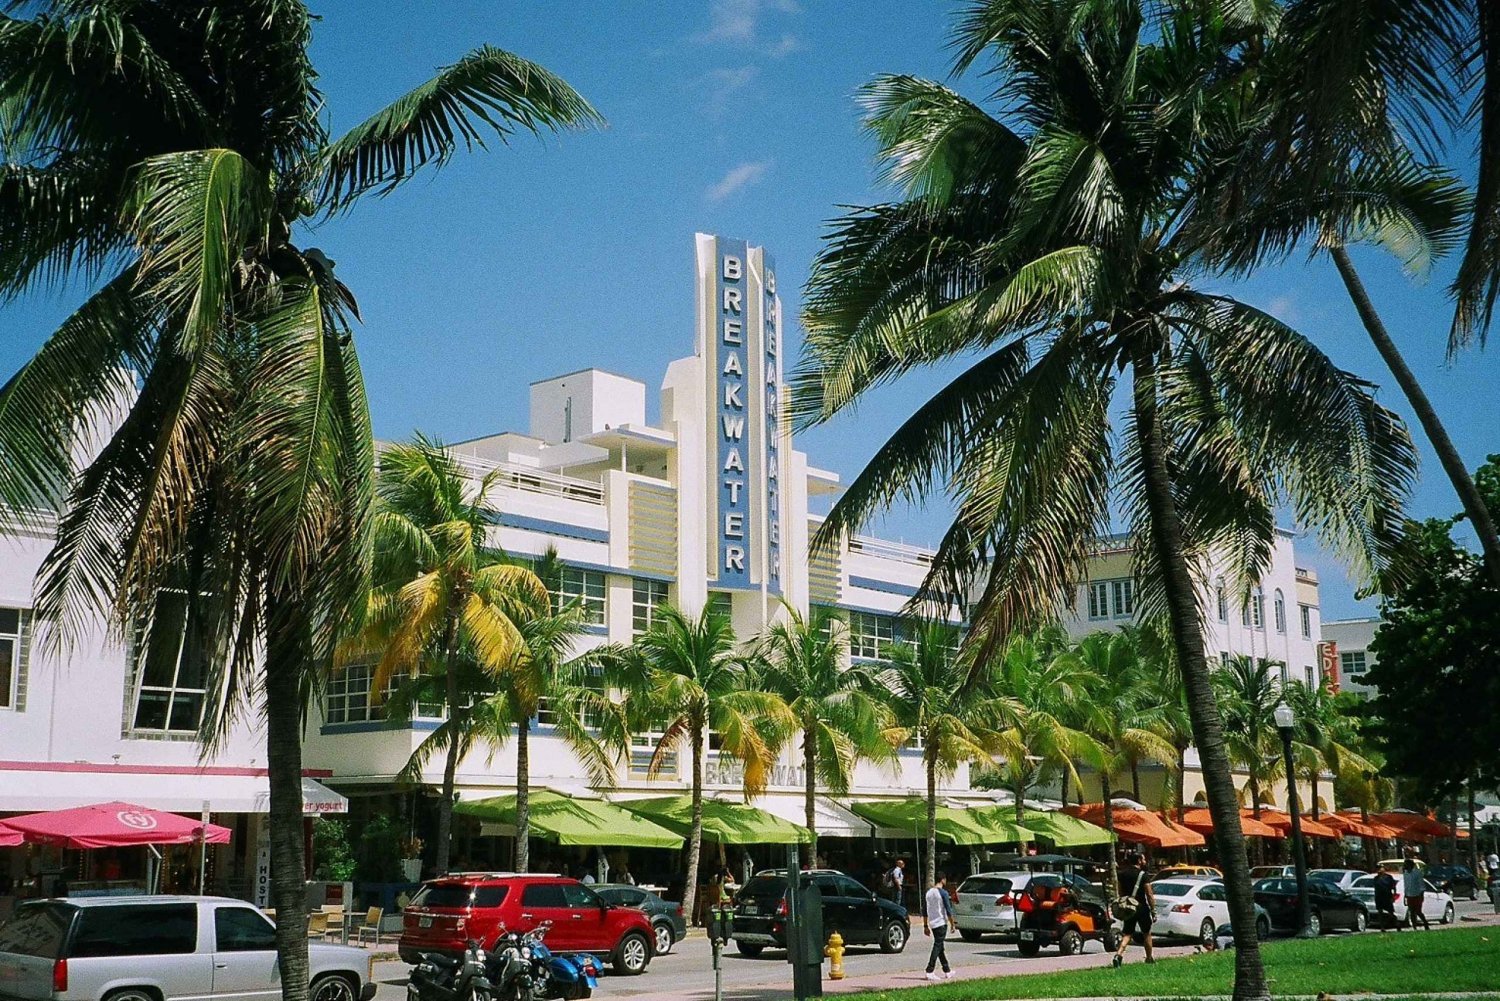 Miami Beach: Self-Guided Walking Tour With Audio Guide